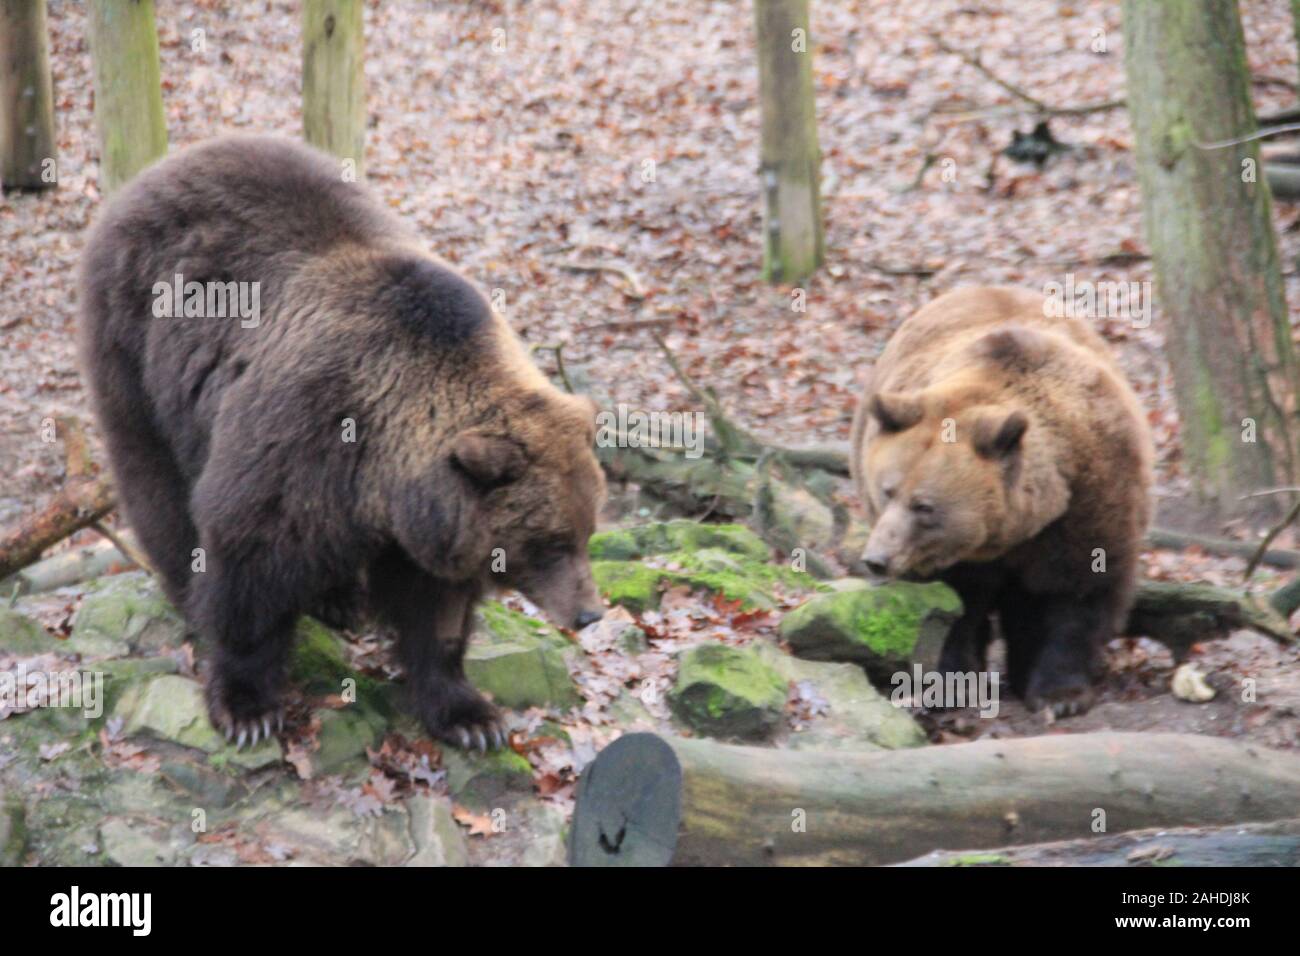 Brown bear In Ouwehands zoo in the Netherlands Stock Photo